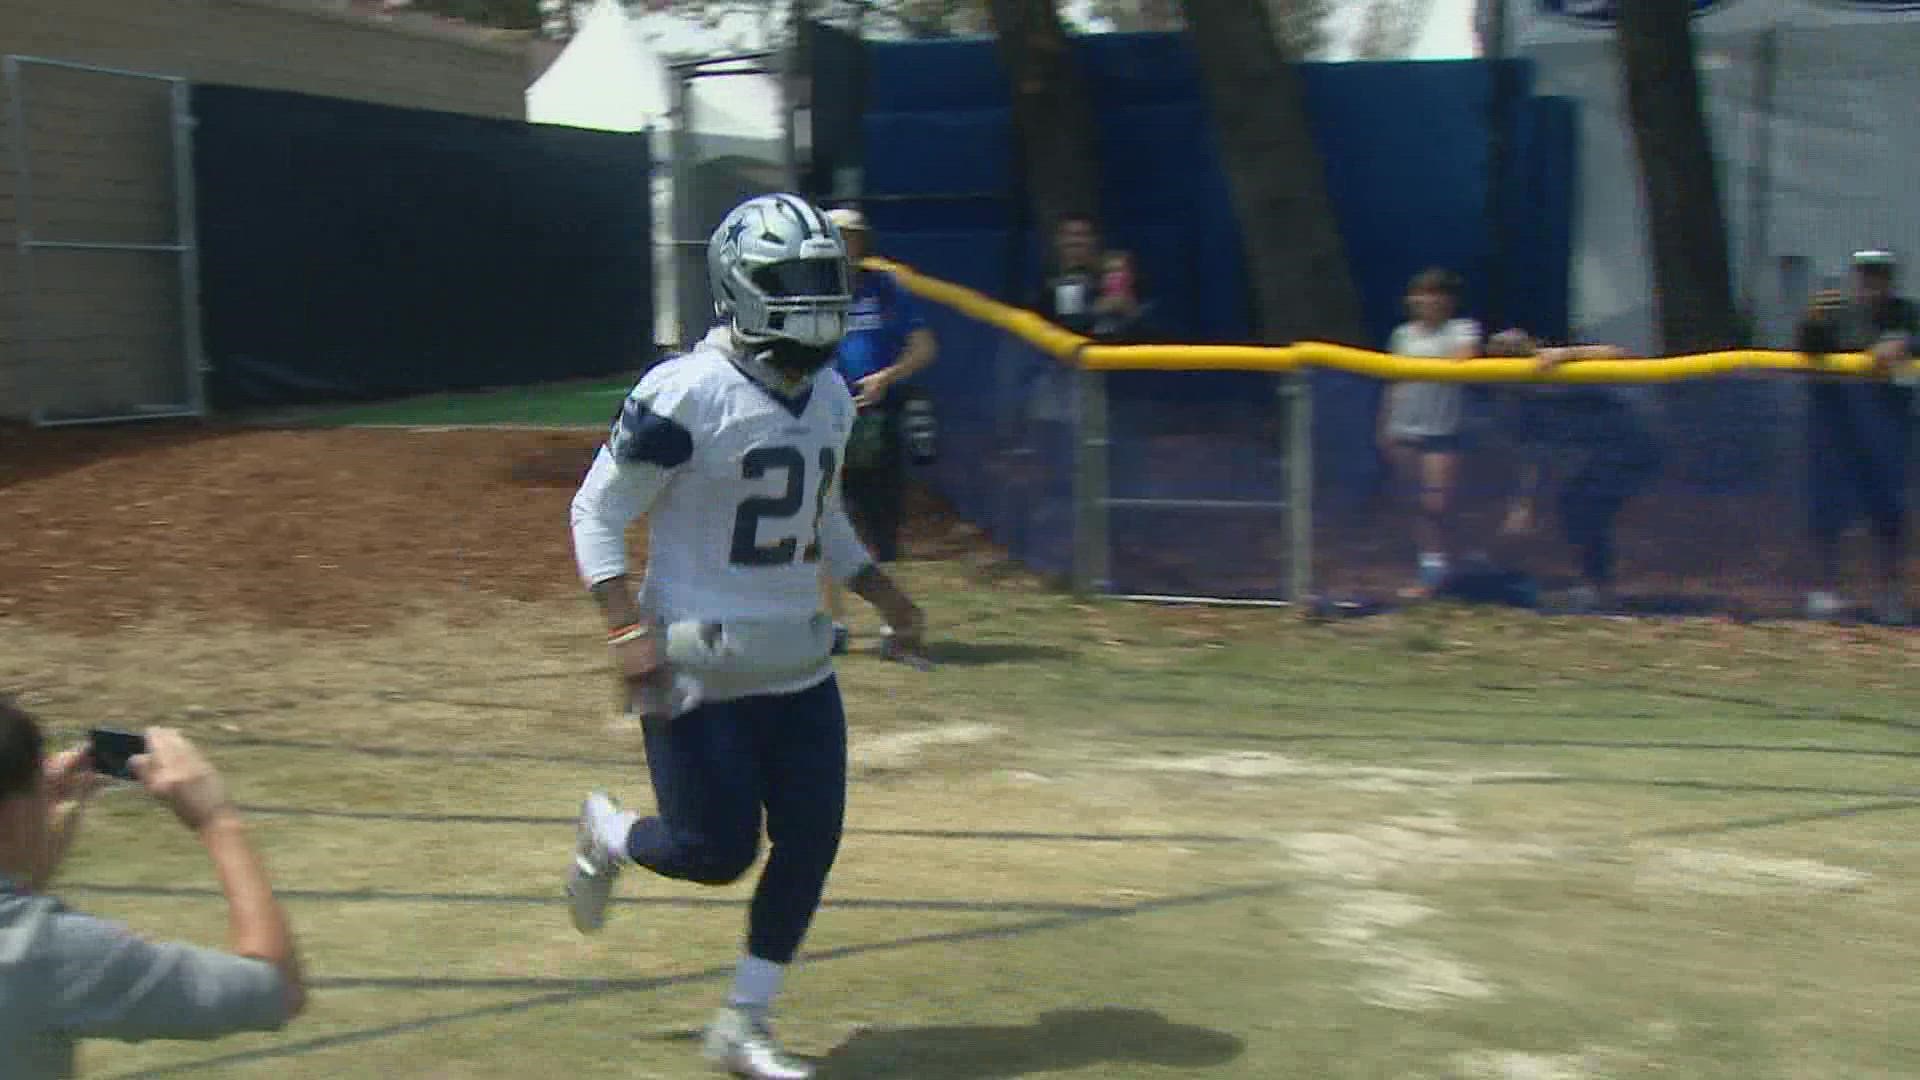 The Dallas Cowboys had their first practice at their training camp in Oxnard, CA.